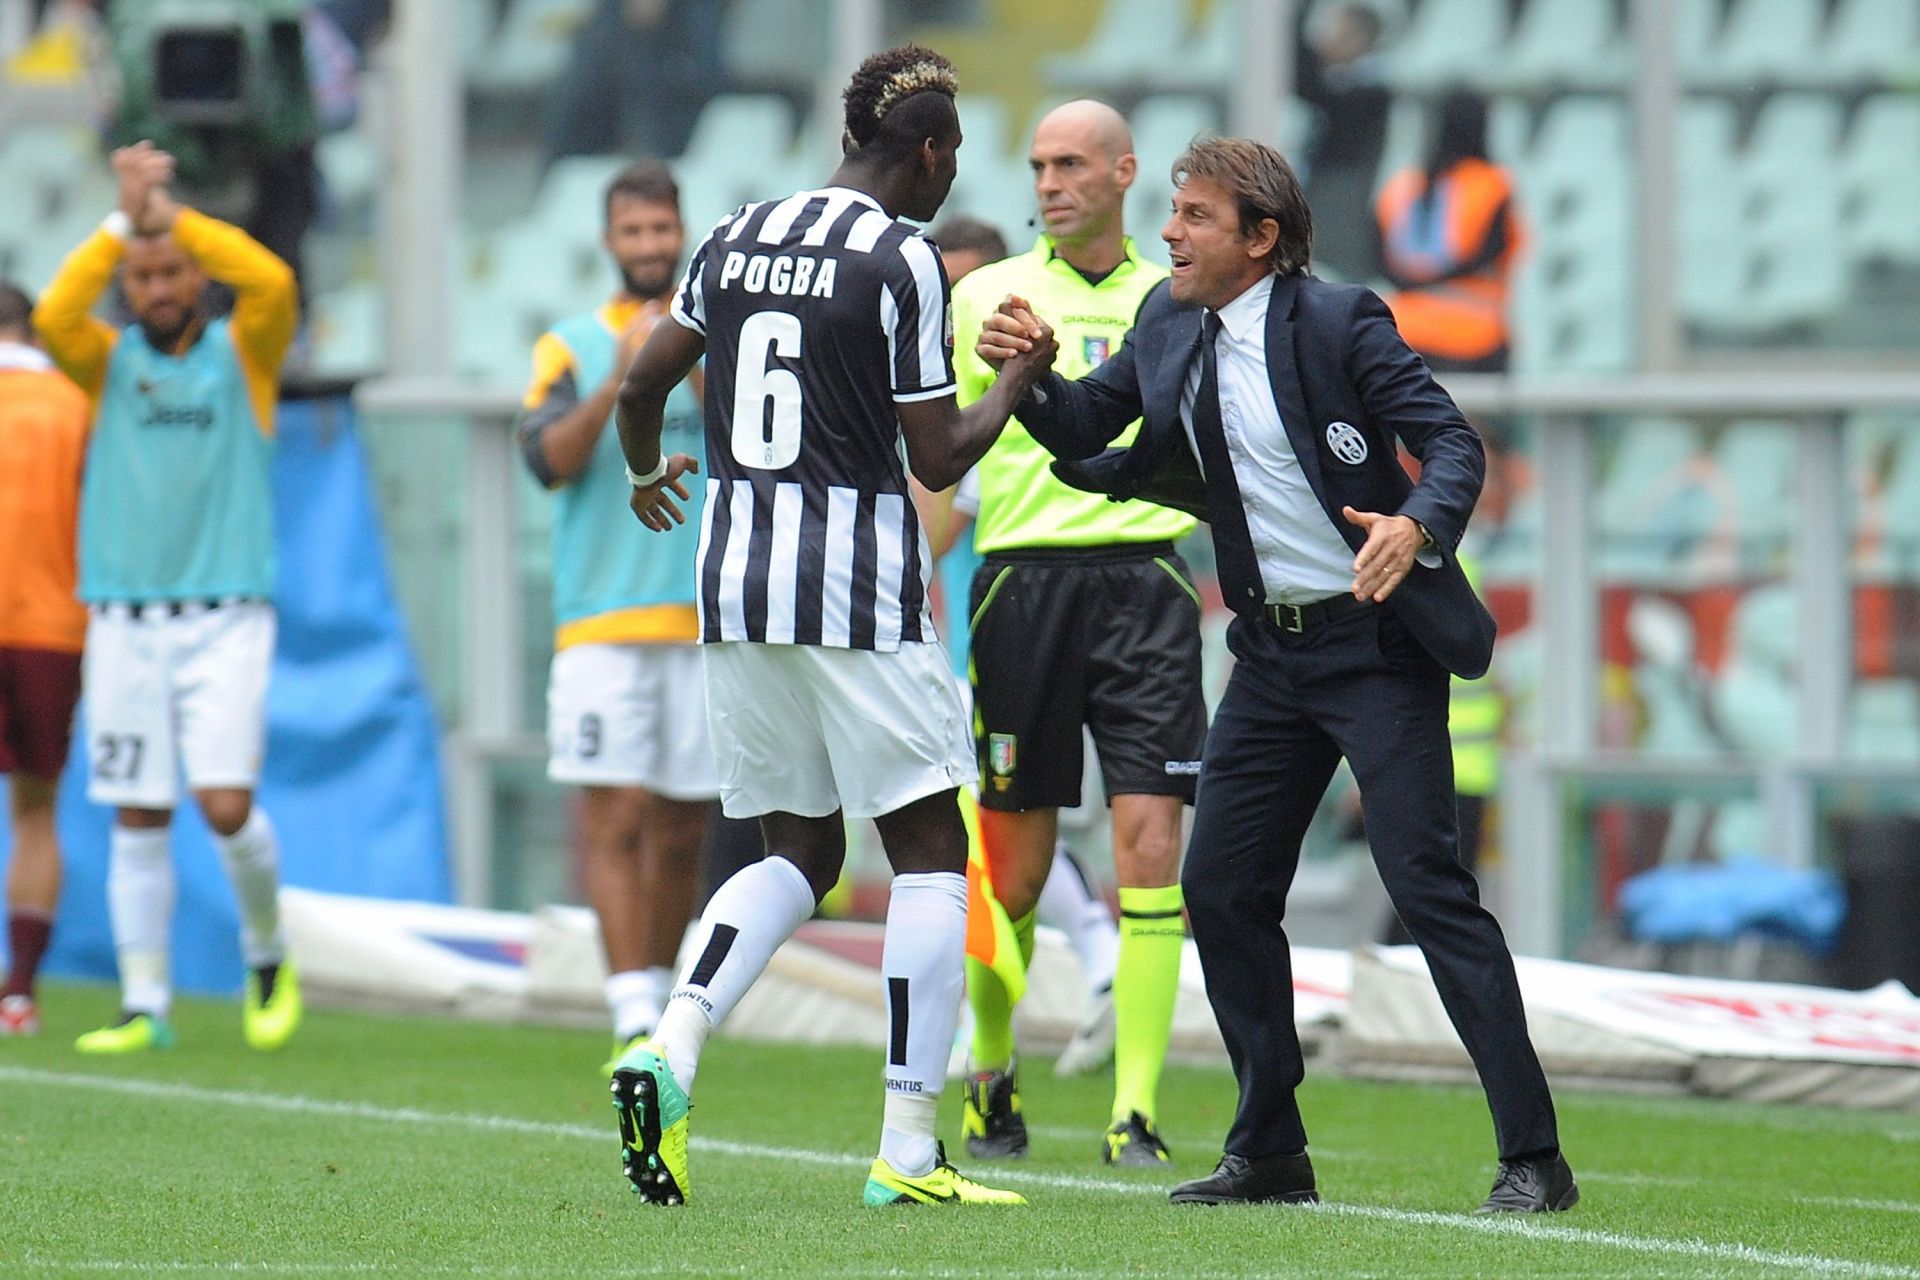 Pogba has history with both Conte and Juve.